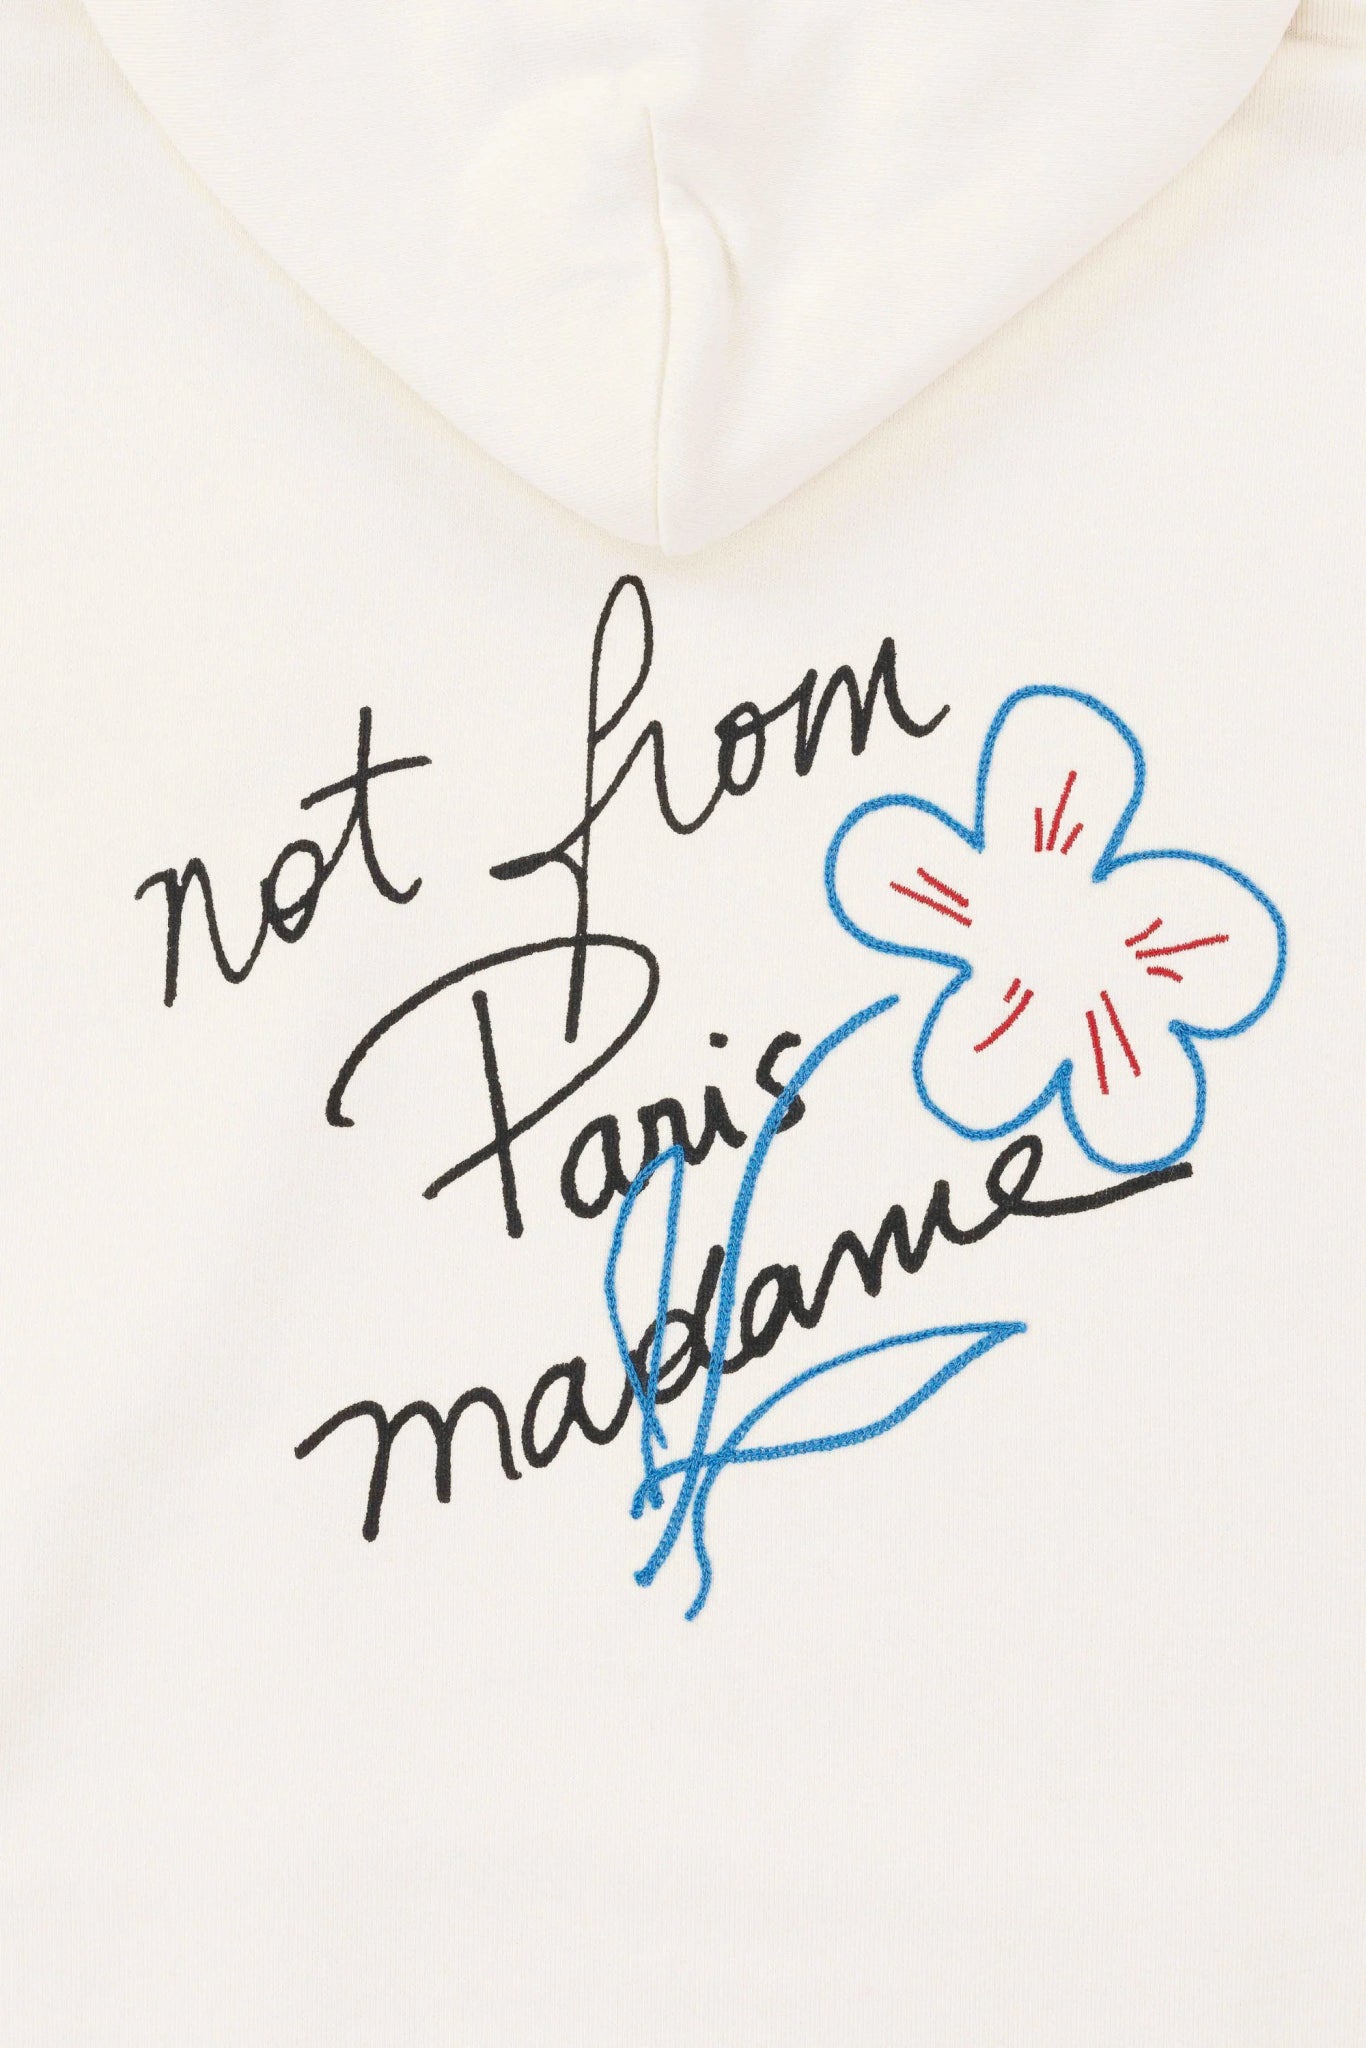 A white cotton DROLE DE MONSIEUR D-HO150-CO127-CM Le Hoodie Slogan Cream with the embroidered slogan "not from paris madeleine" on it.